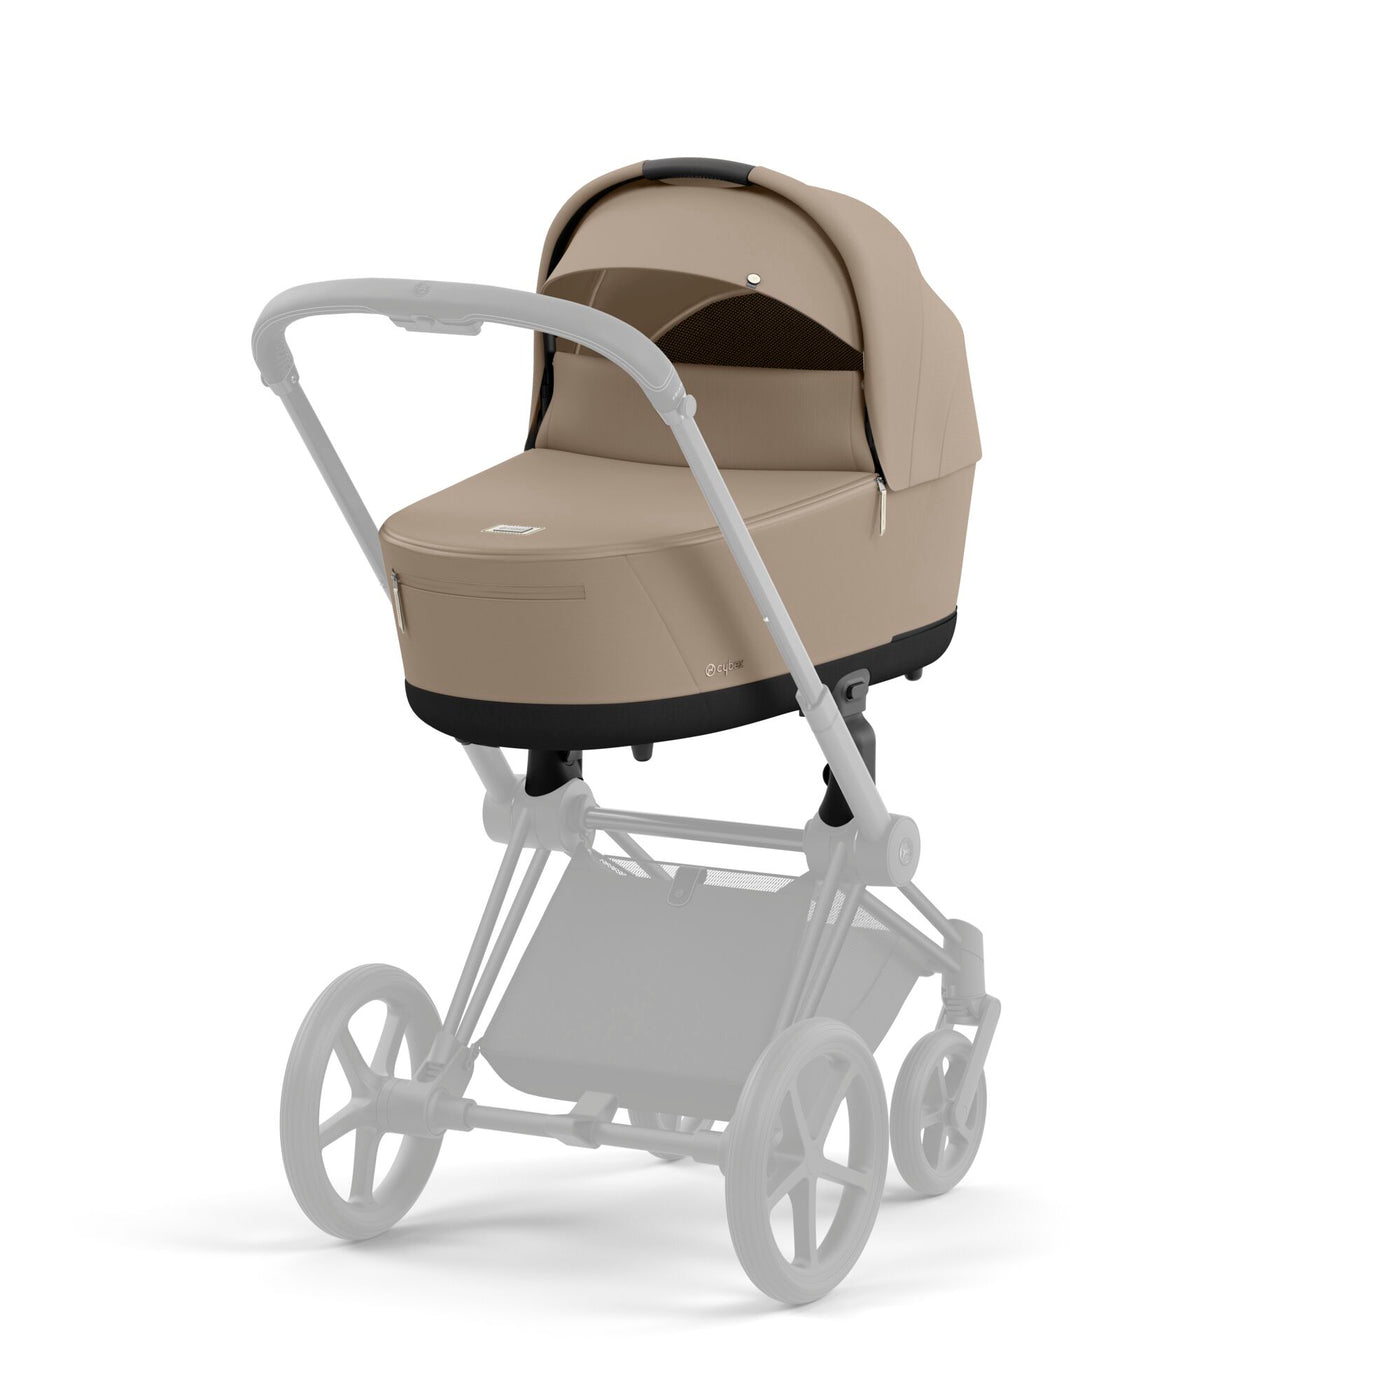 cozy beige lux carrycot from Cybex platinum collection